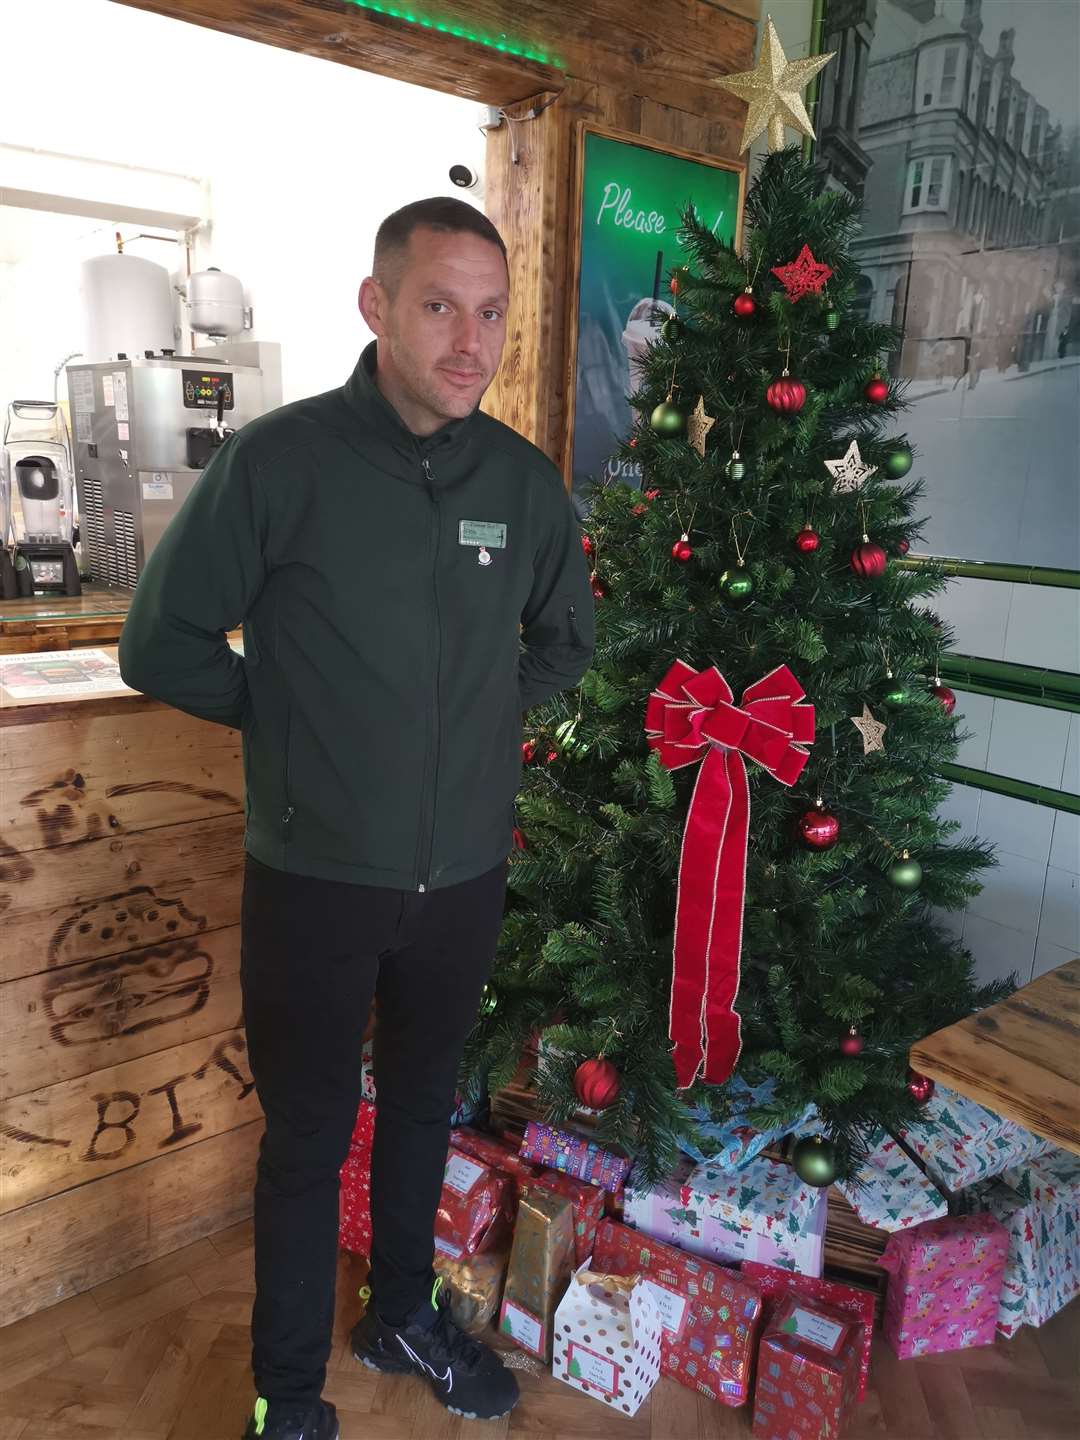 Please Sir! has started a giving tree so disadvantaged children can have presents at Christmas